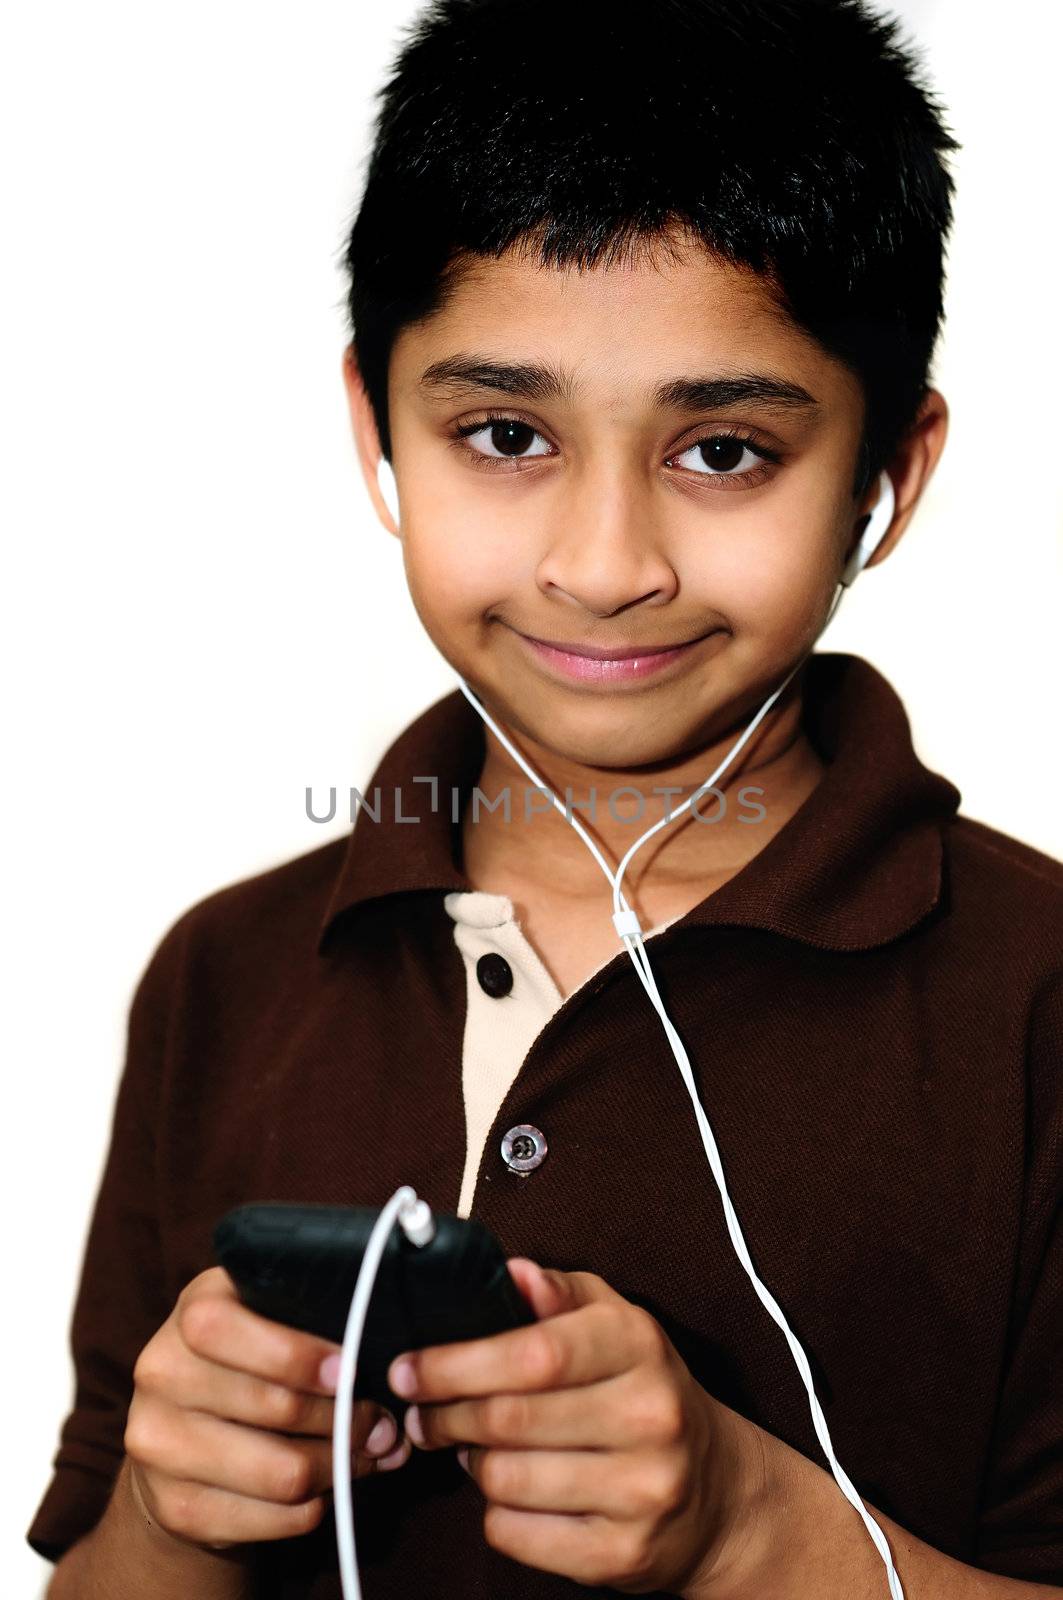 An handsome Indian kid listening to music happily